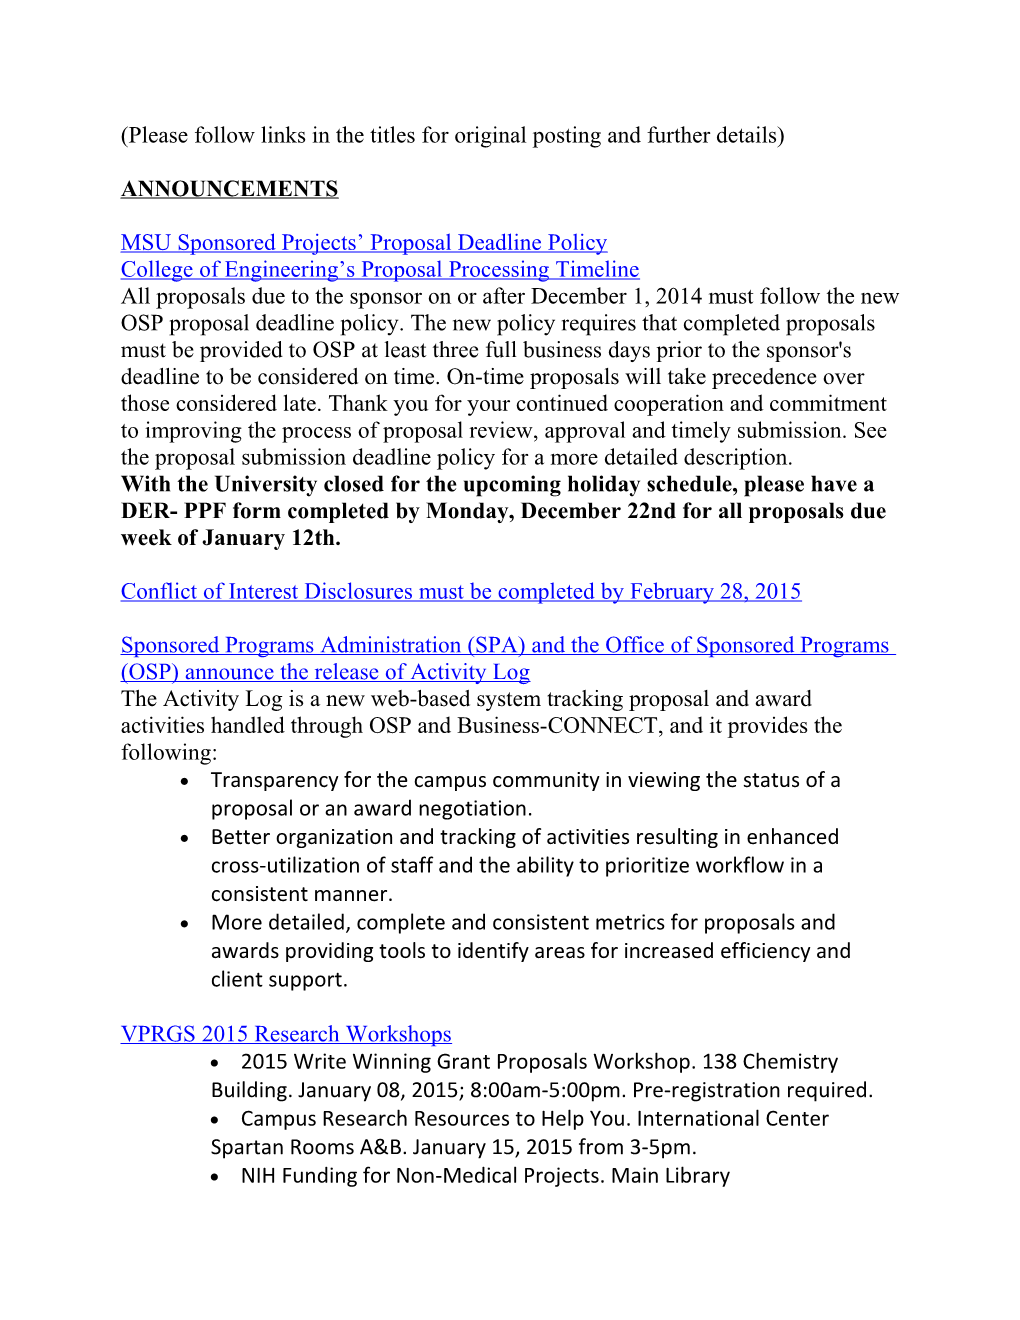 MSU Sponsored Projects Proposal Deadline Policy